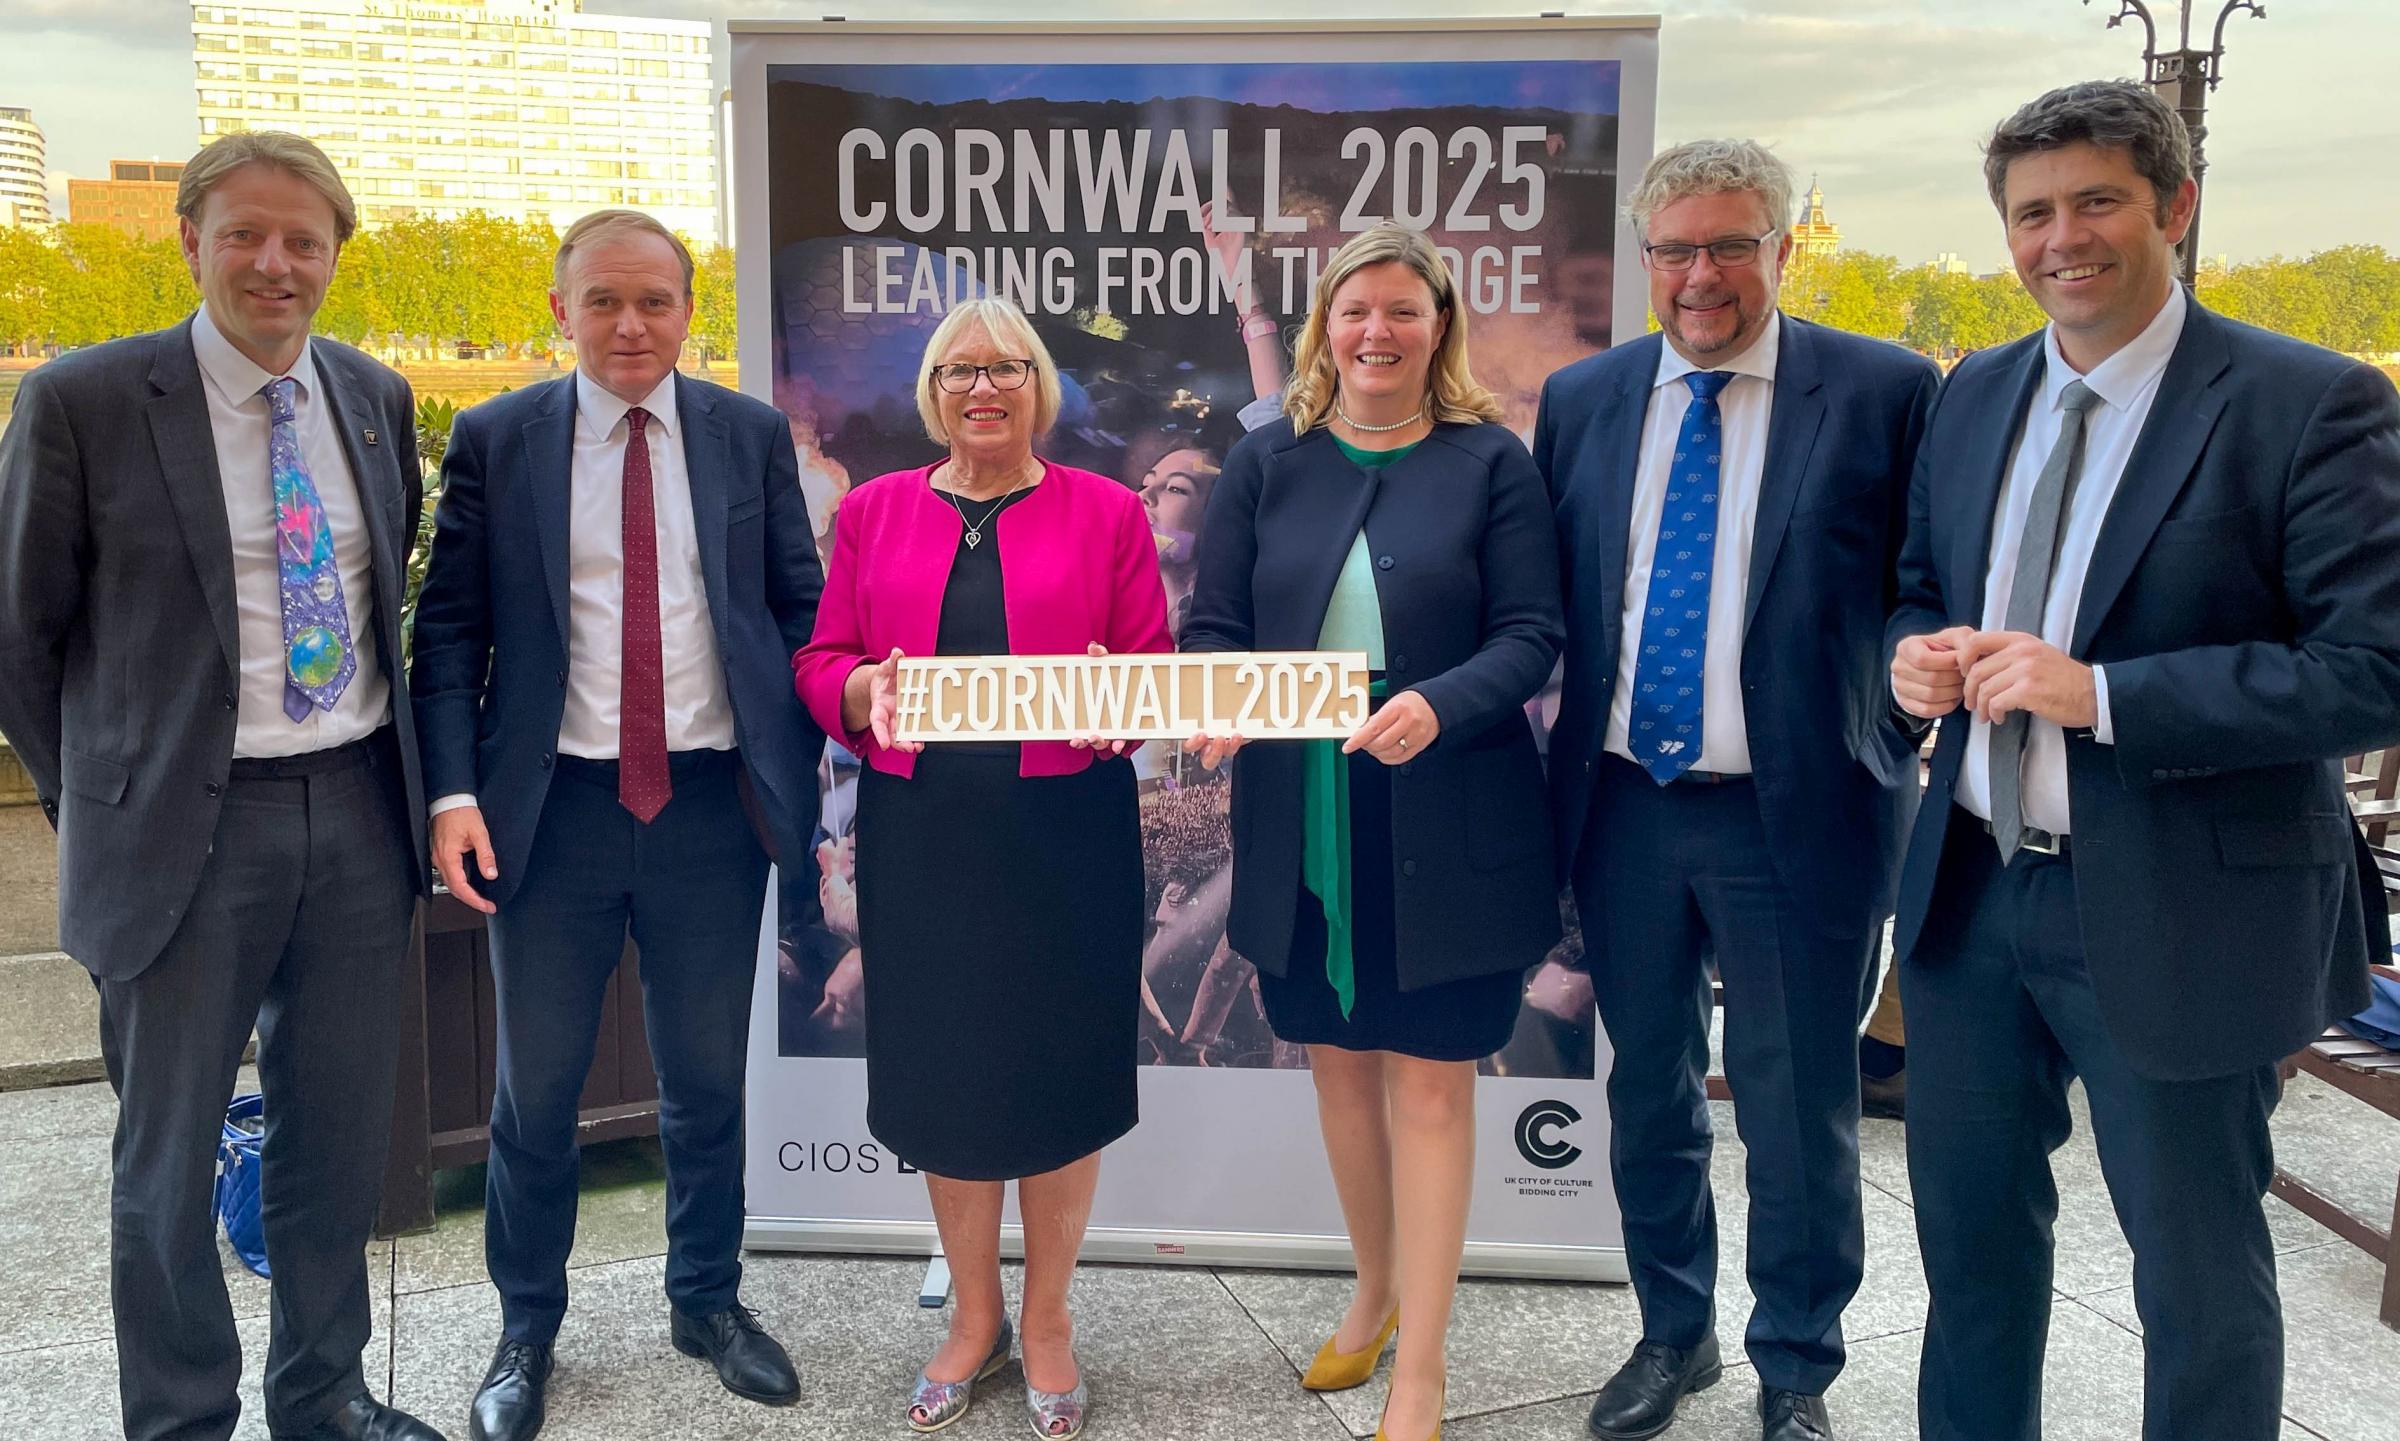 MPs backing the bid to make Cornwall the UK City of Culture in 2025